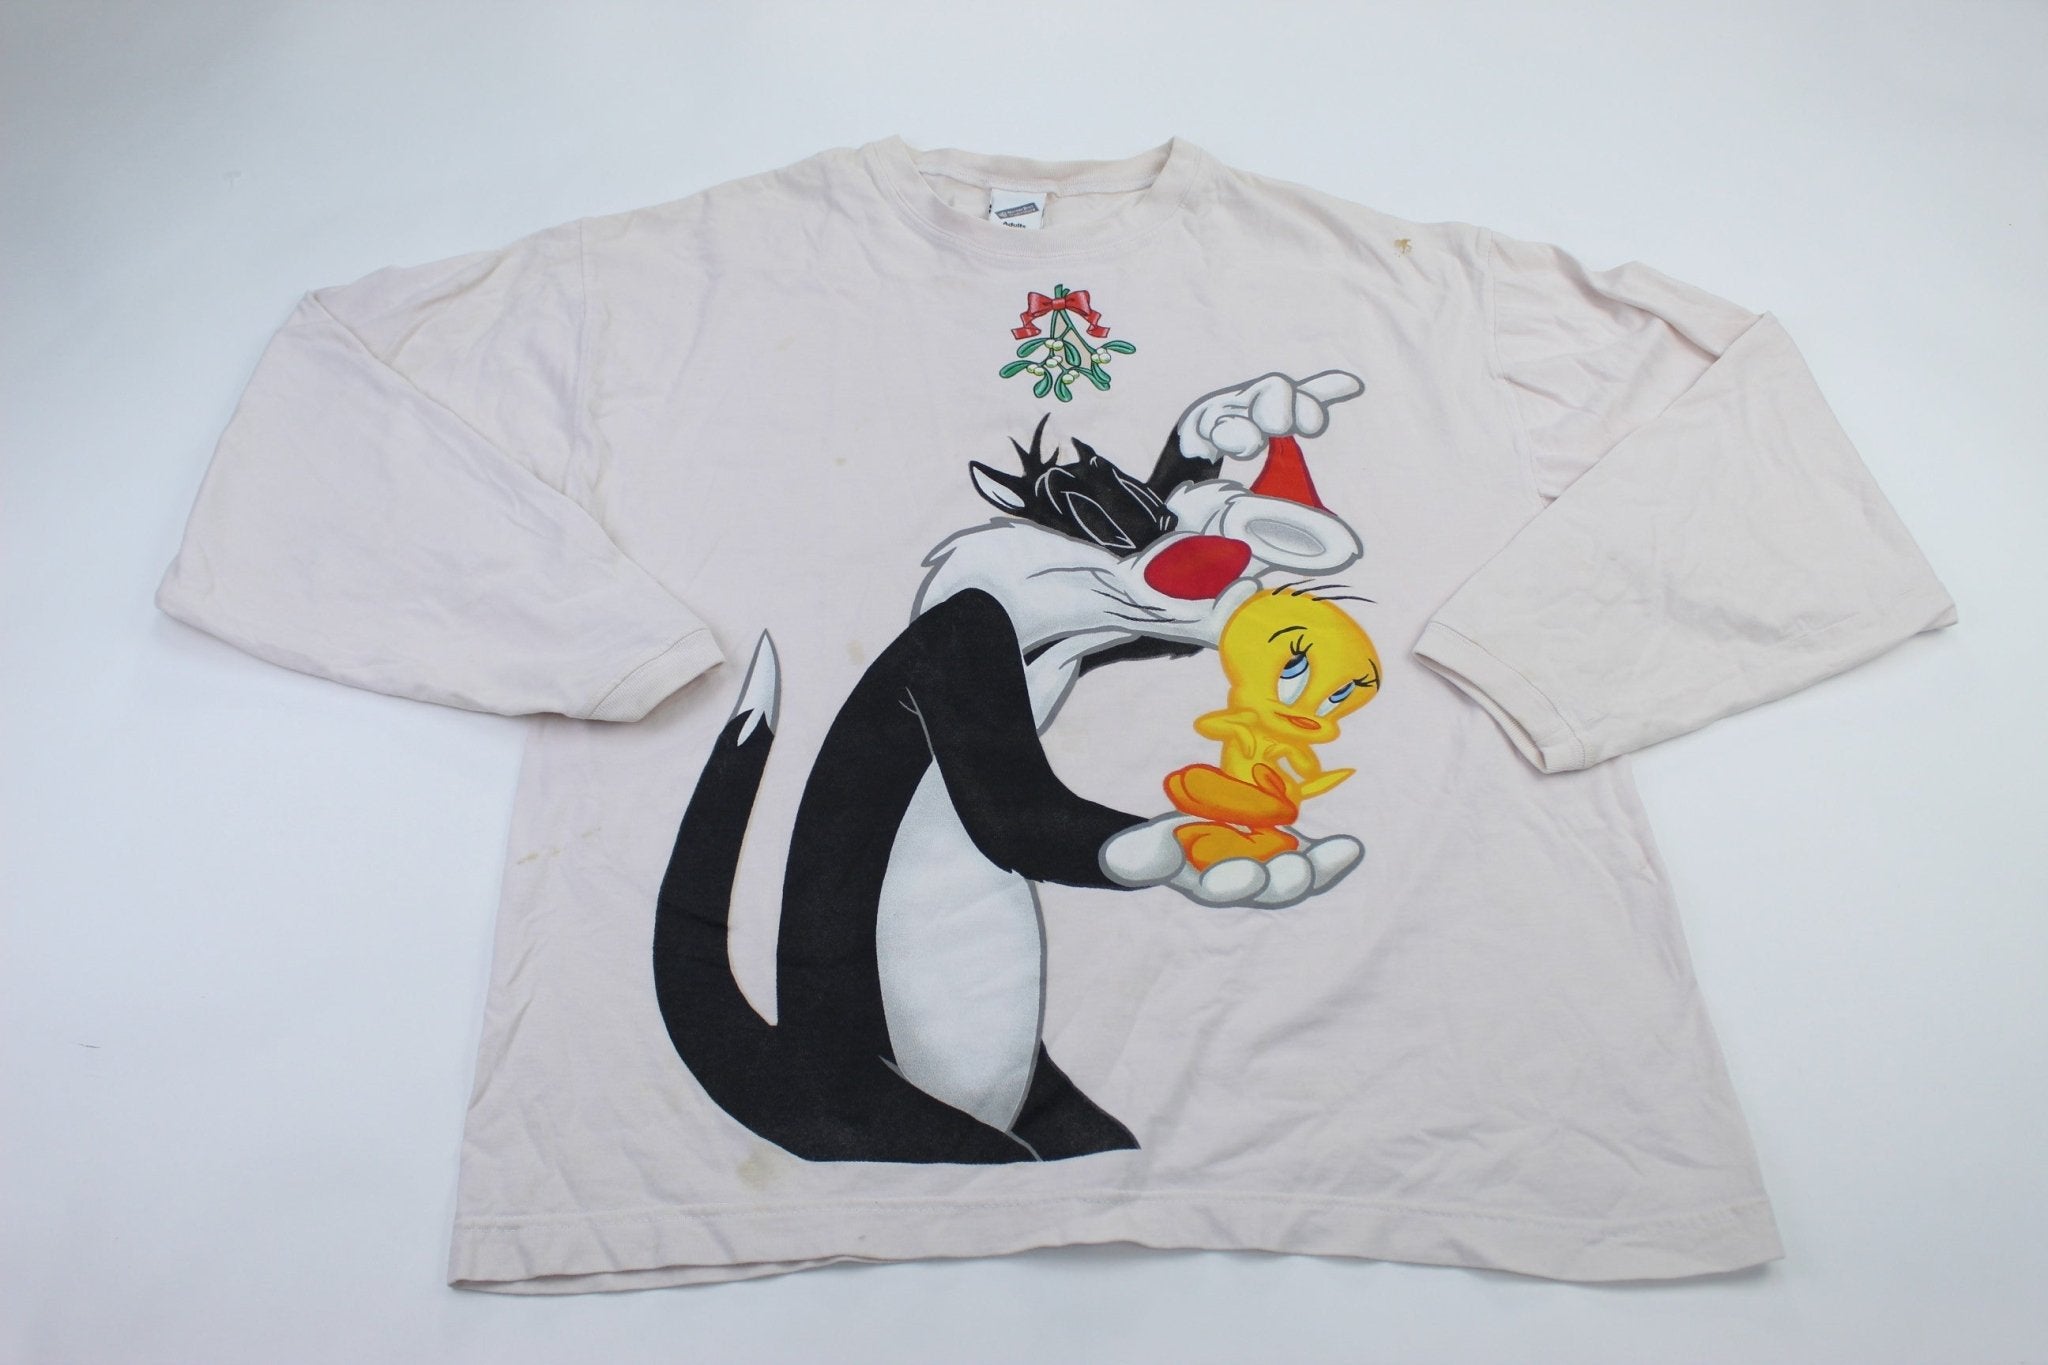 Vintage Looney Tunes Graphic T-Shirt - ThriftedThreads.com